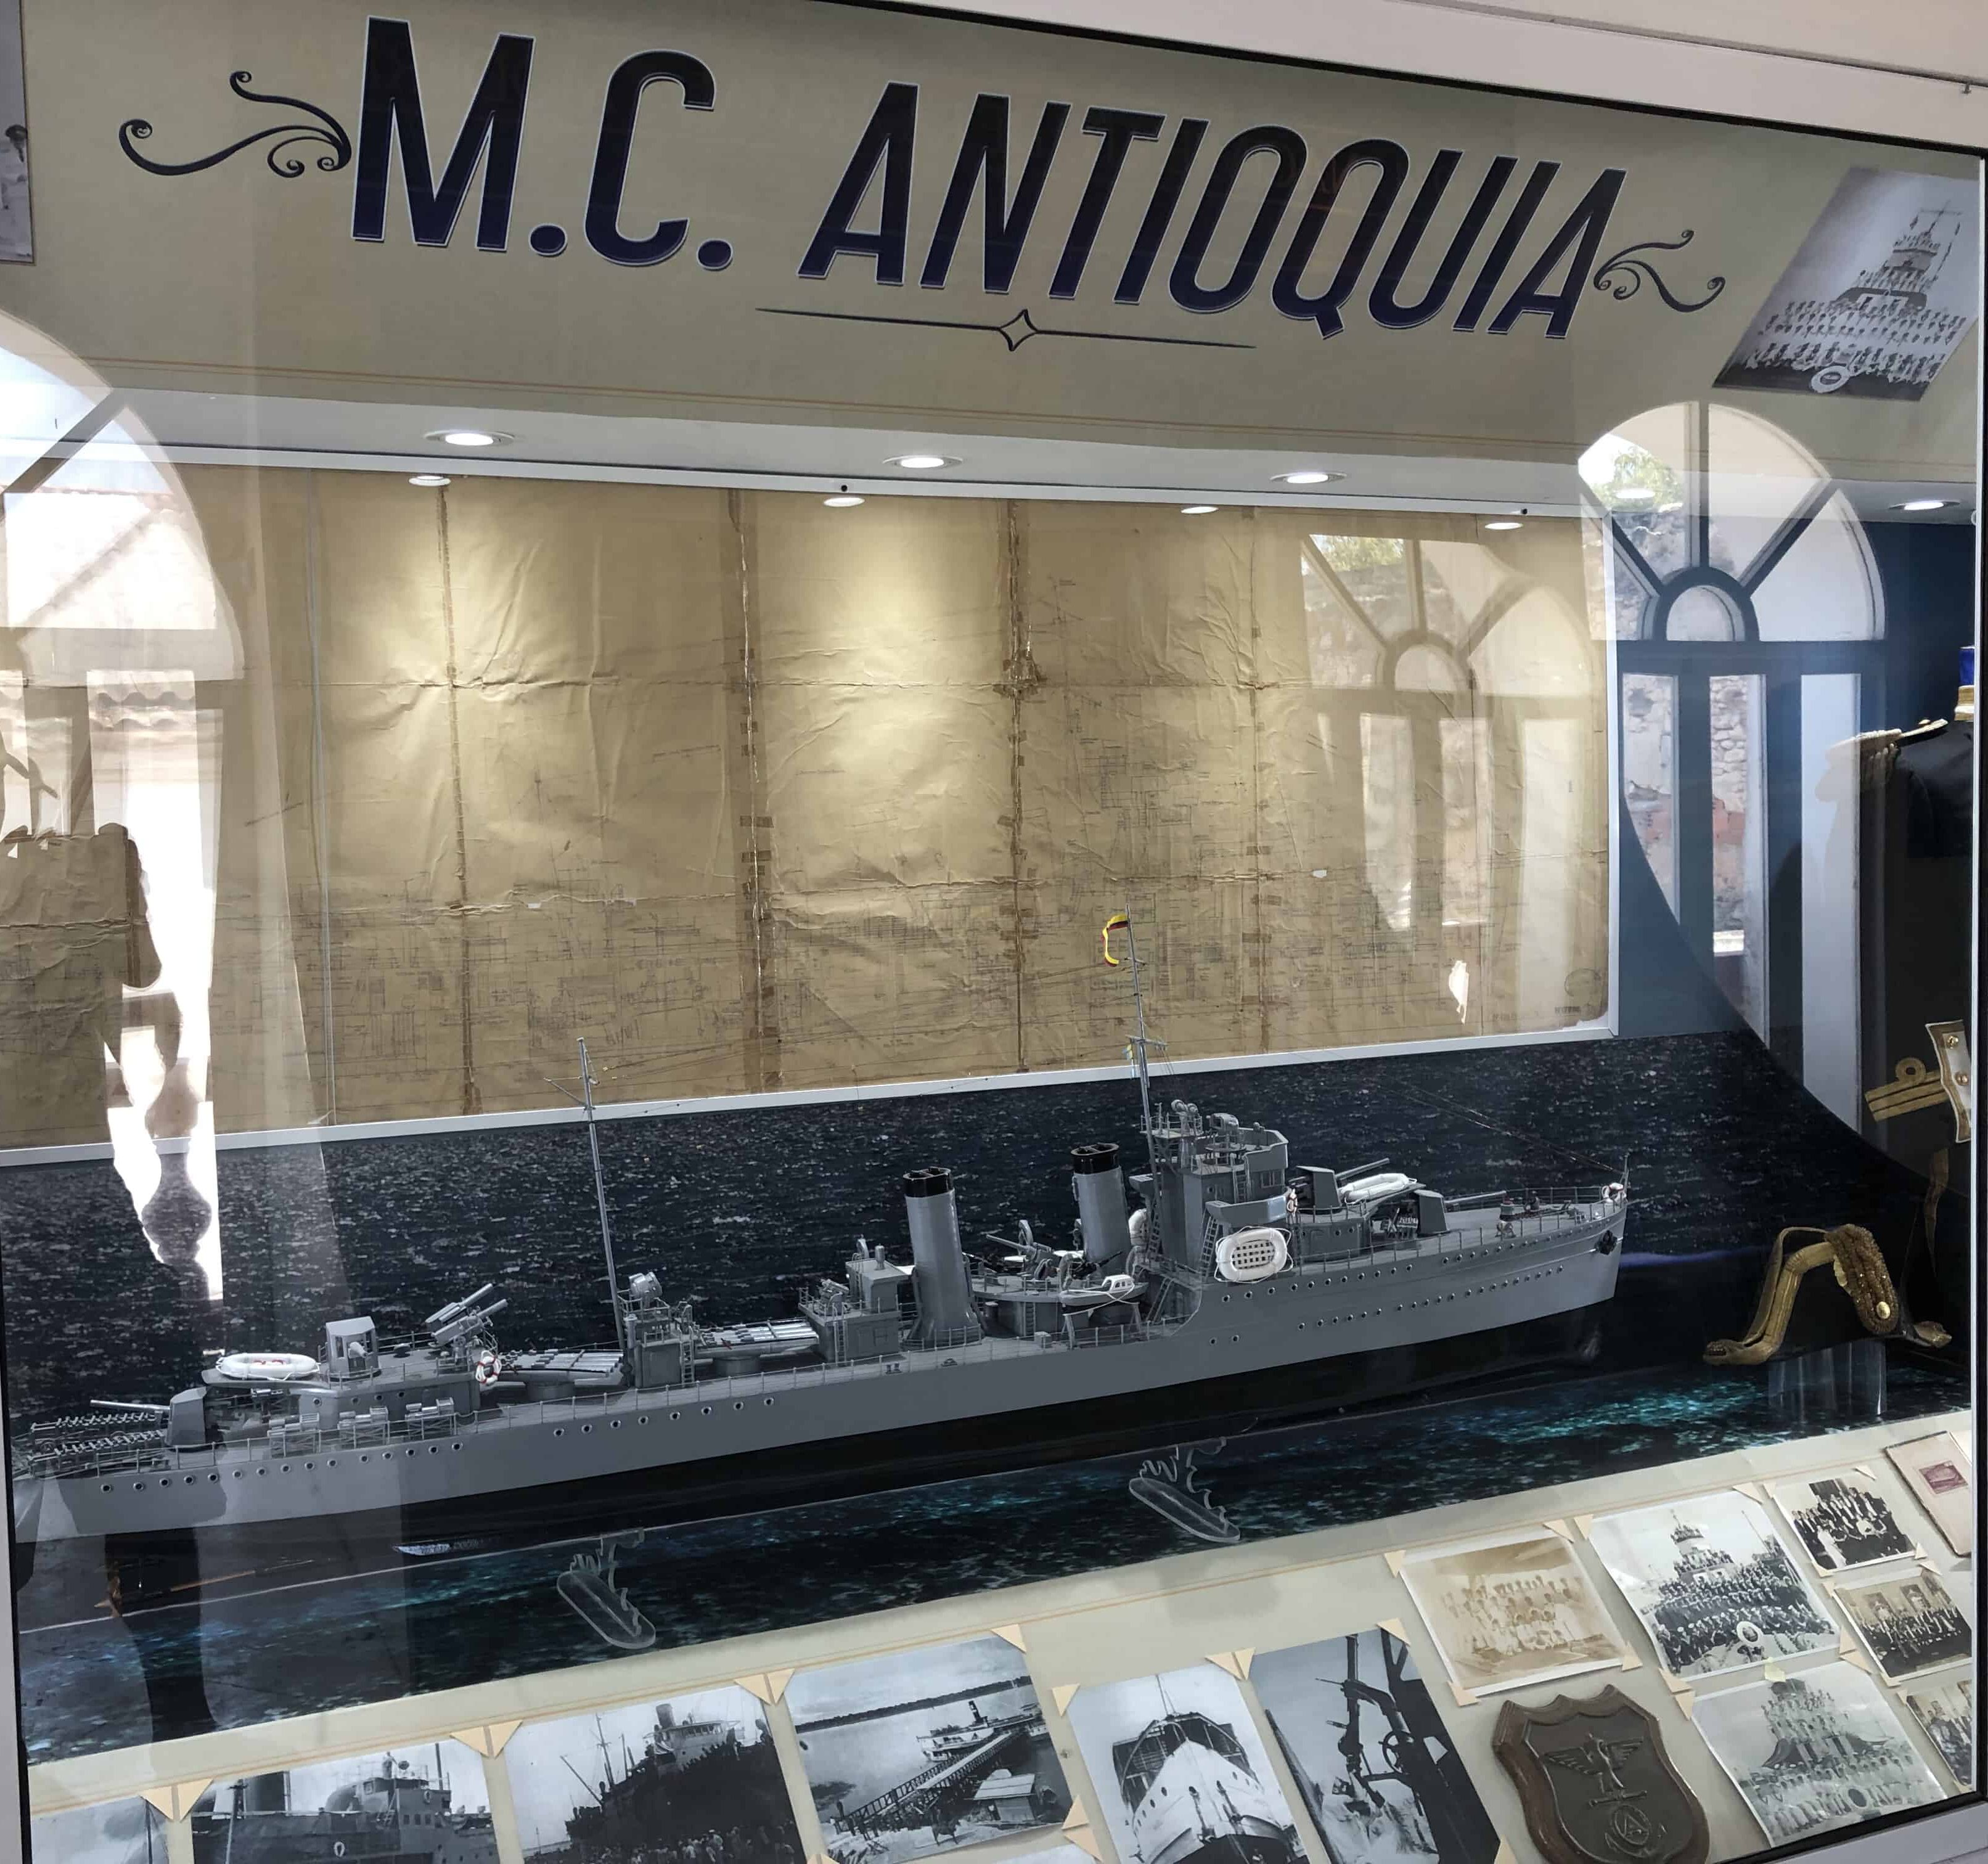 Model of the M.C. Antioquia at the Caribbean Naval Museum in Cartagena, Colombia